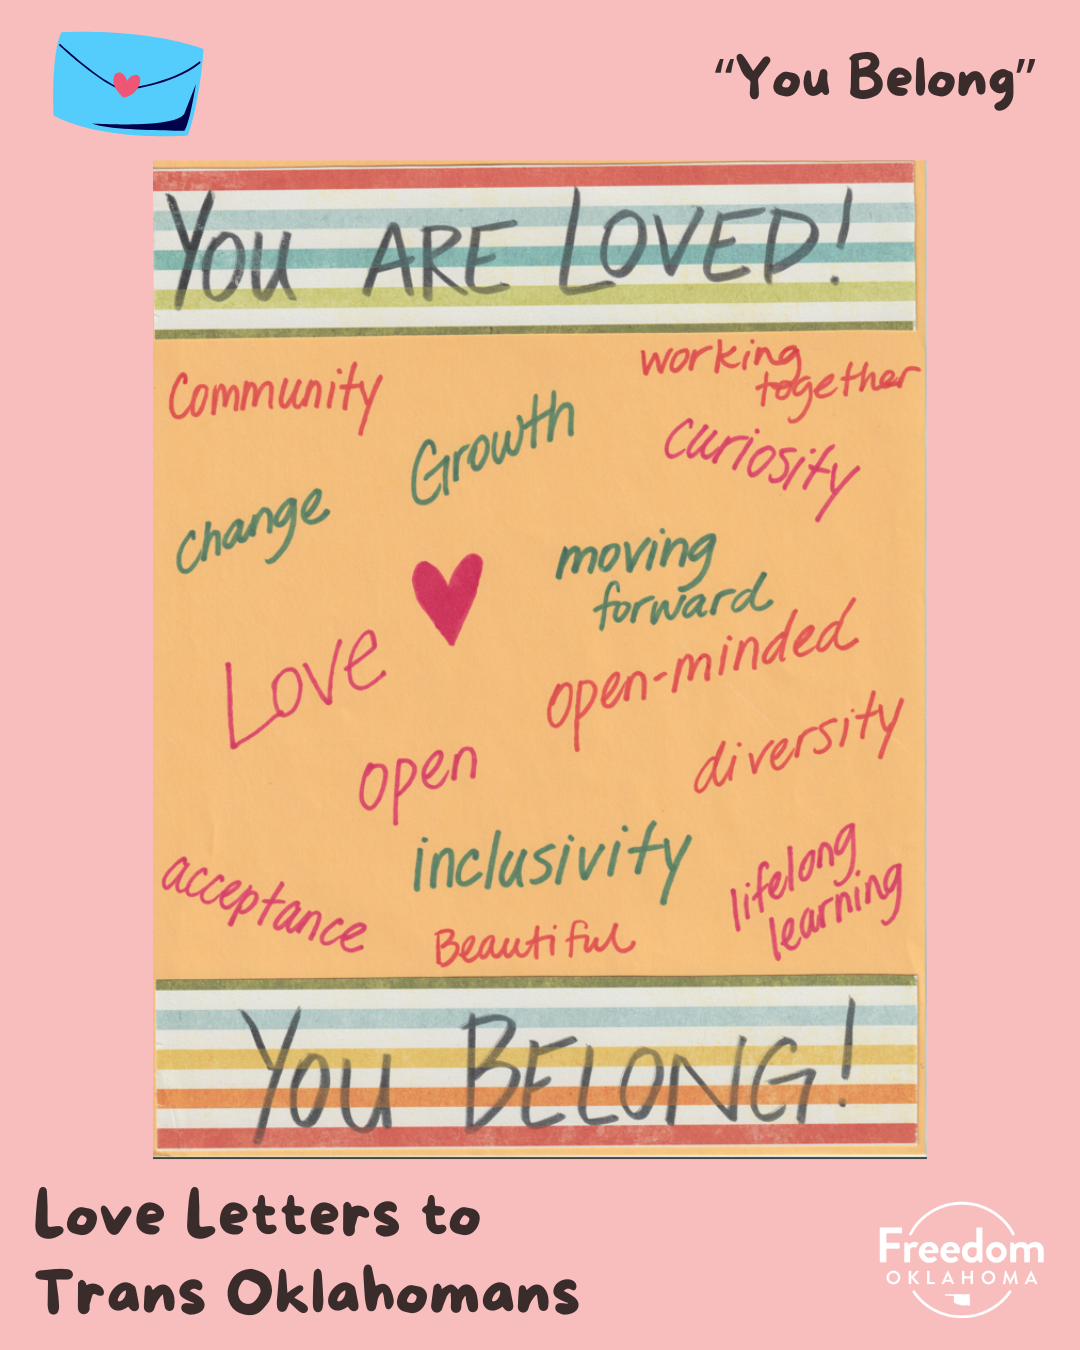  Similar pink graphic with artwork in the center: a scanned image on yellow paper with multicolored stripes at the top and bottom with writing "you are loved! you belong!" In the center in red and green marker are the words "community change growth w